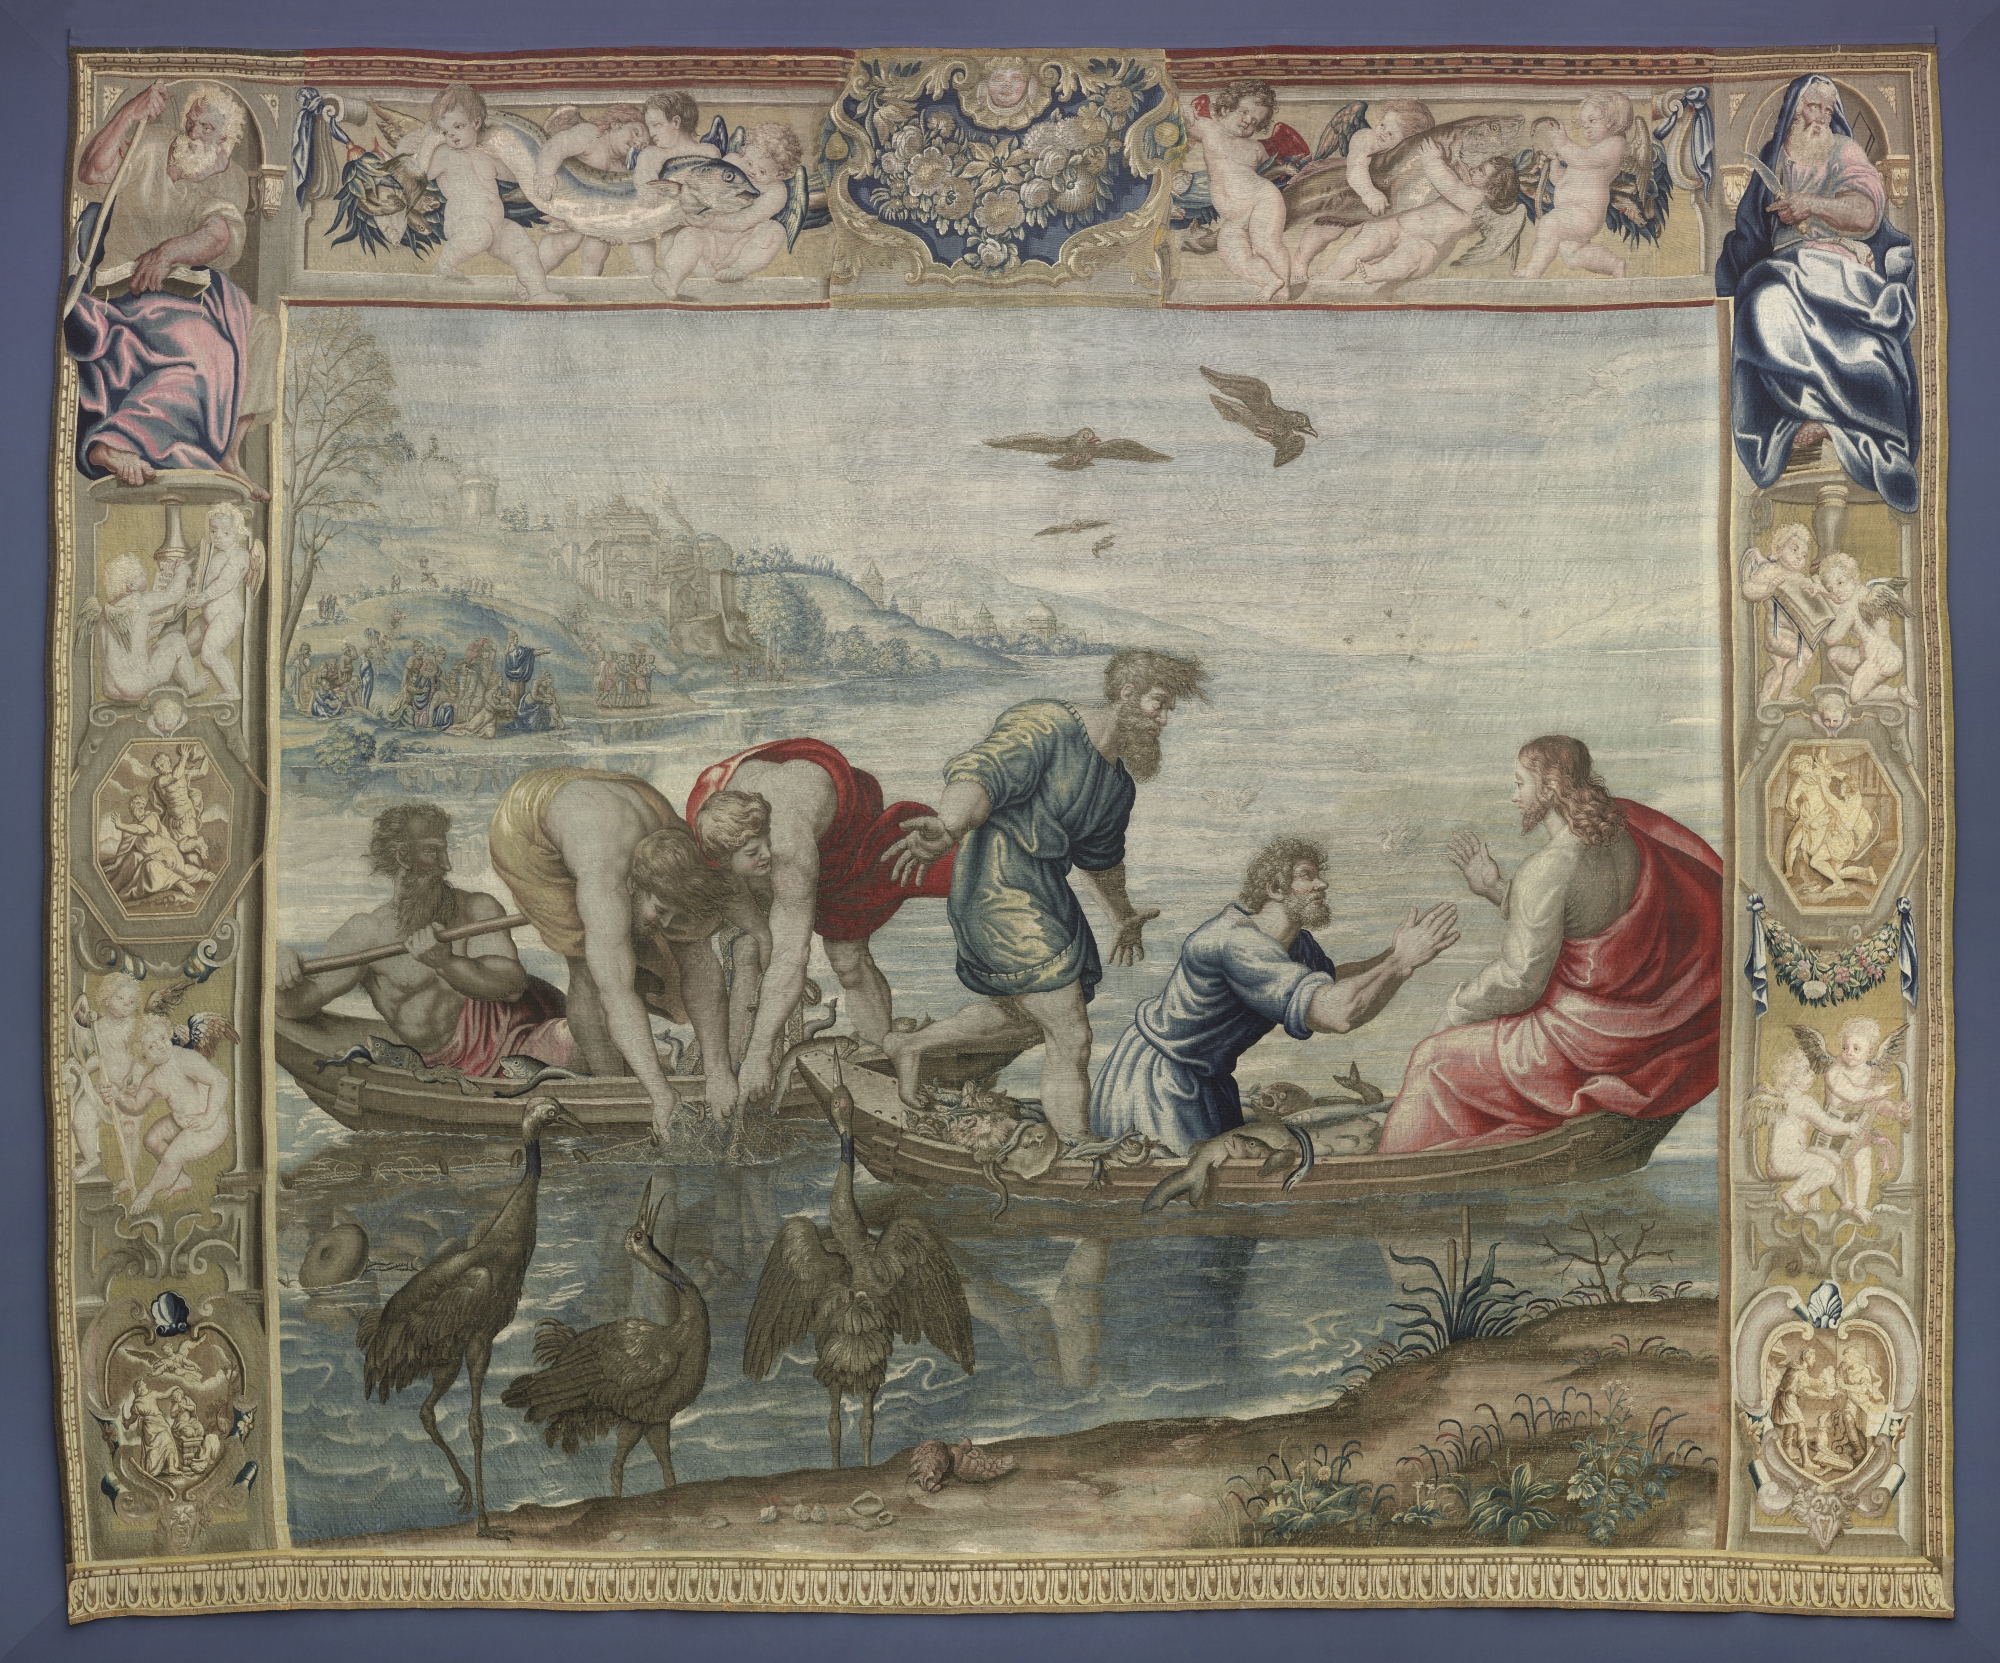 Mortlake Tapestry Manufactory (after drawings by Raphael), The Miraculous Draft of fishs, after 1625. Tapestry, Staaliche Kunstsammlugen Dresden, Gemäldegalerie Alte Meister.  CONTRIBUTED